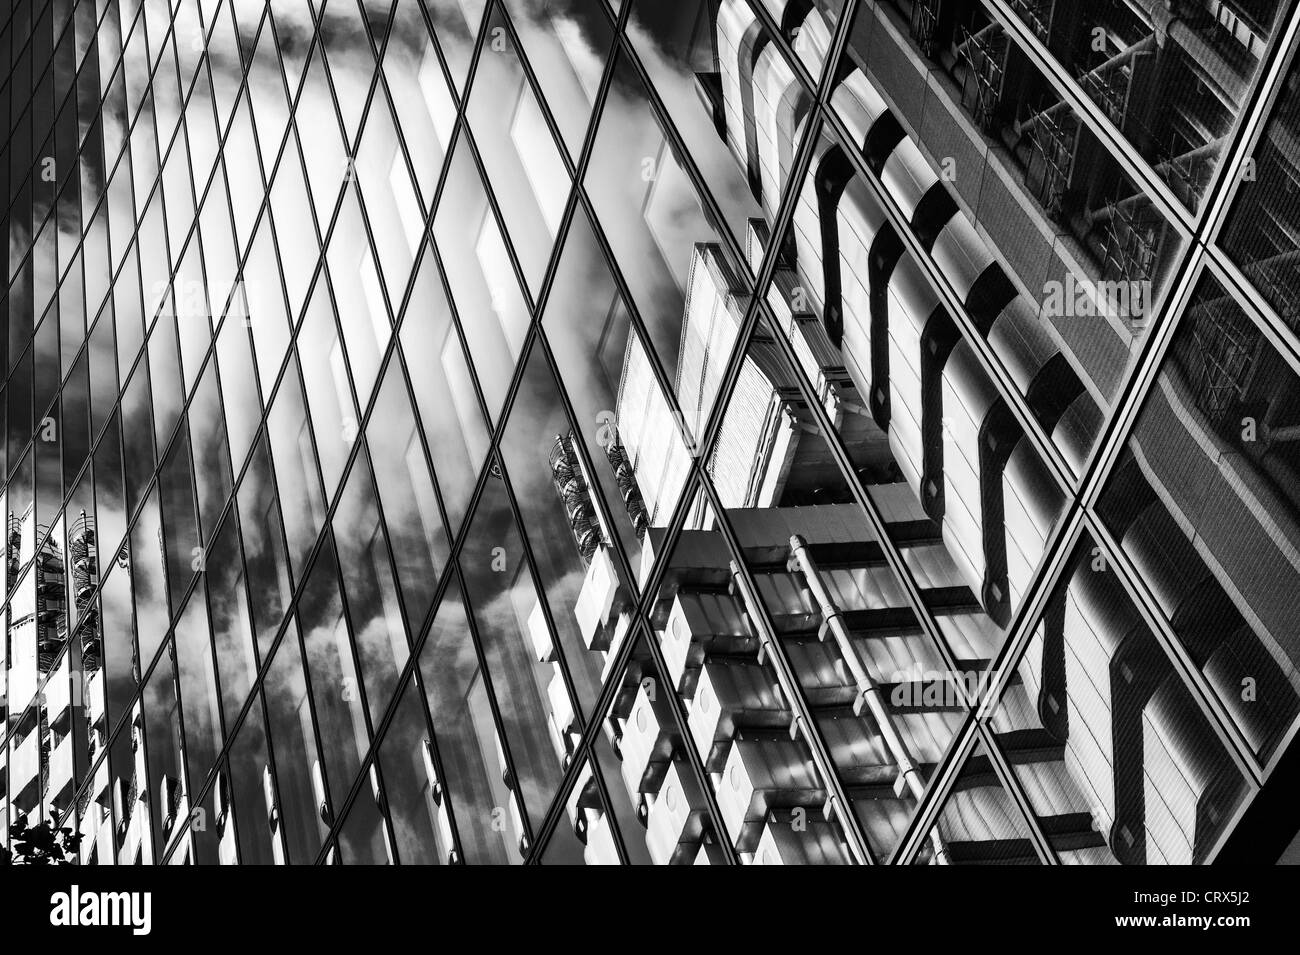 Willis building with Lloyds building reflections abstract. Lime Street. London, England. Monochrome Stock Photo